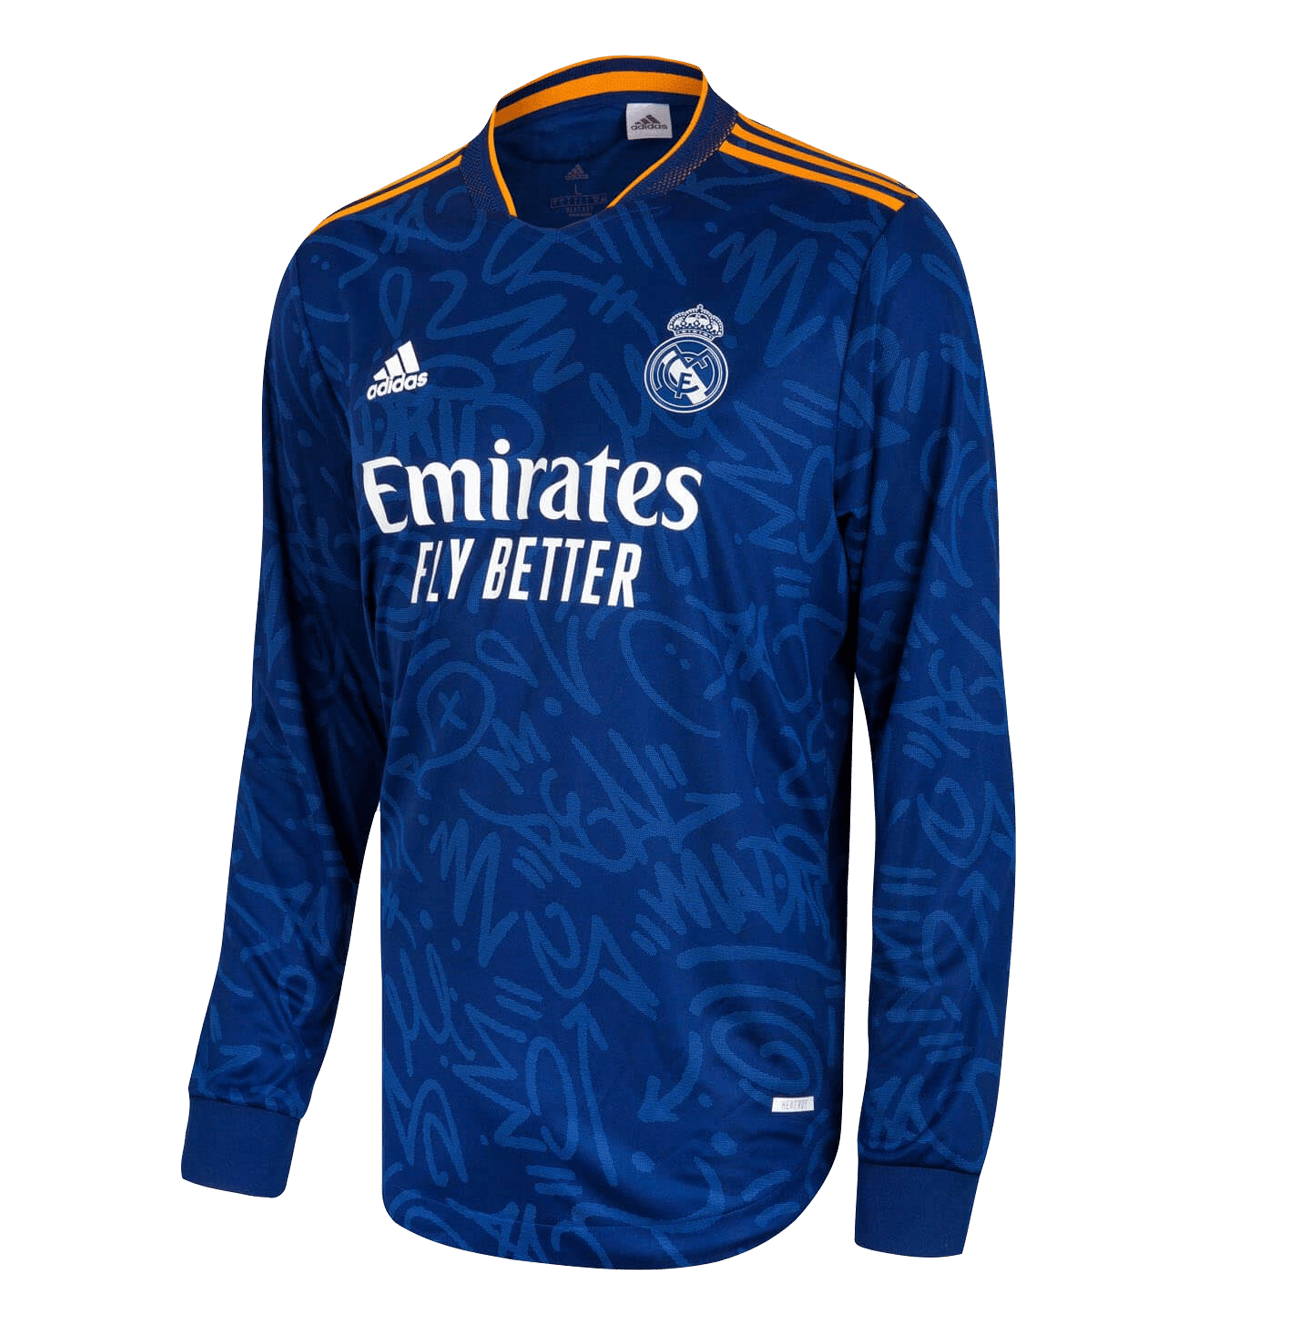 jersey real madrid png transparent background free hd image download